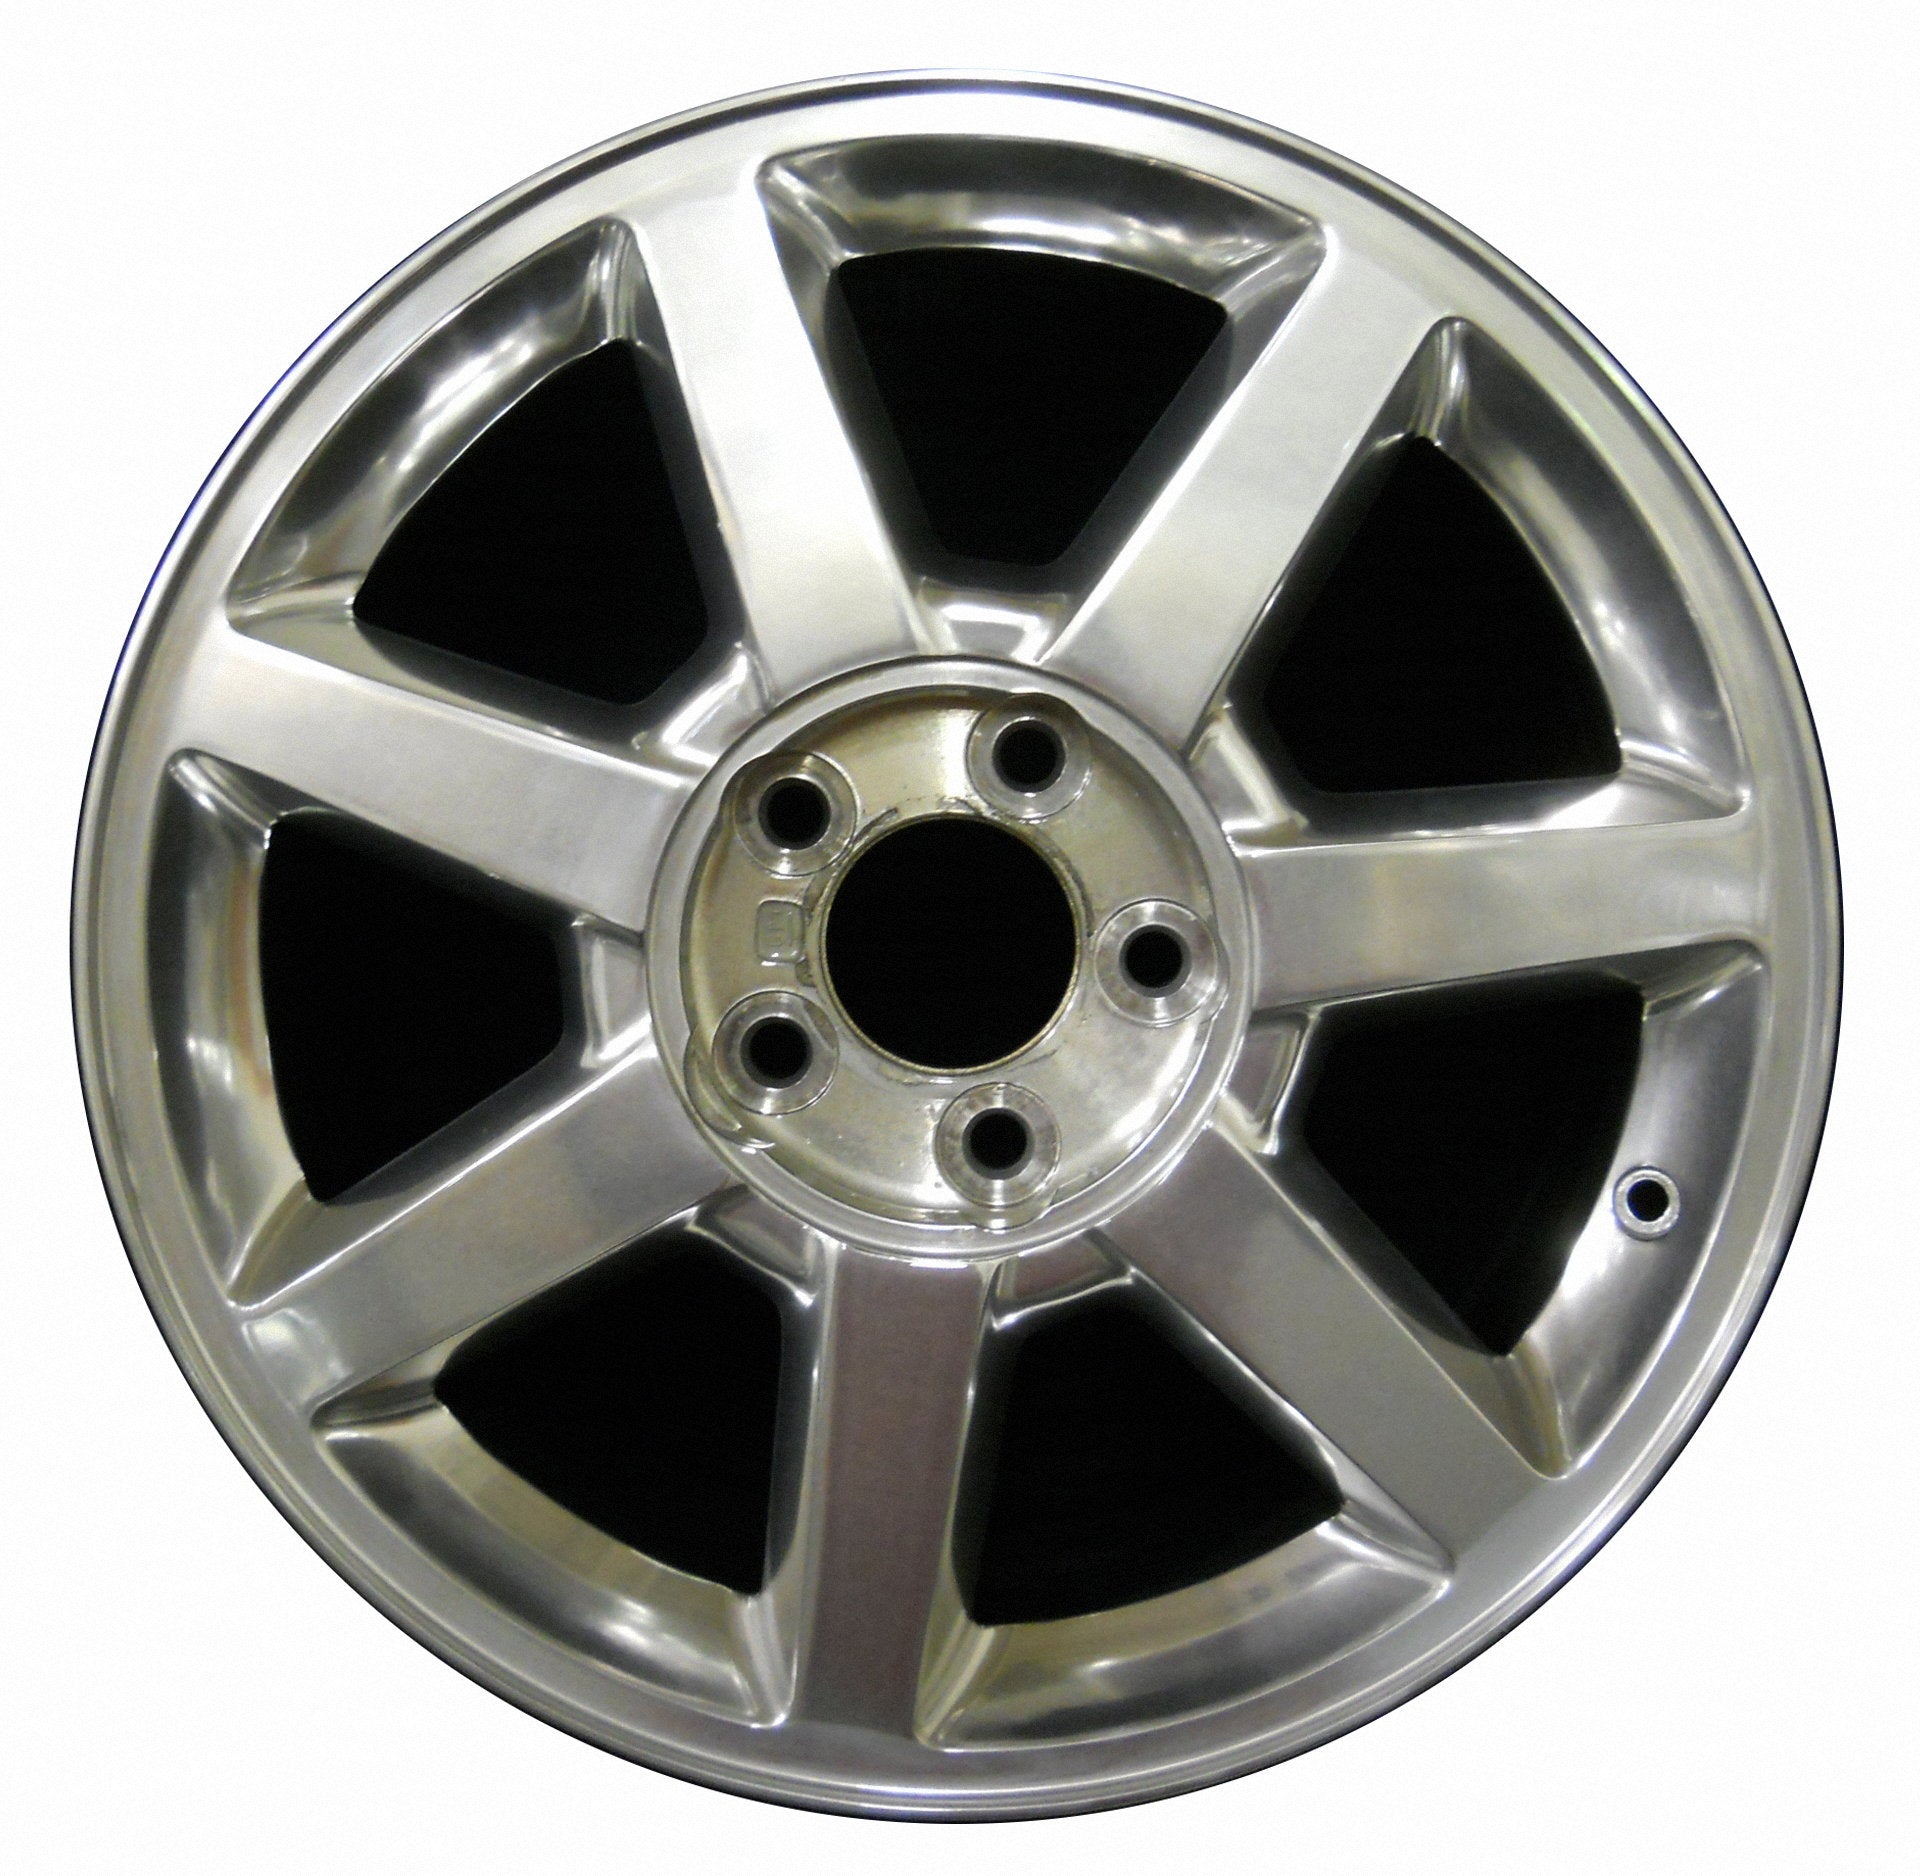 Cadillac CTS  2005, 2006, 2007, 2008 Factory OEM Car Wheel Size 17x8 Alloy WAO.4587RE.FULL.POL